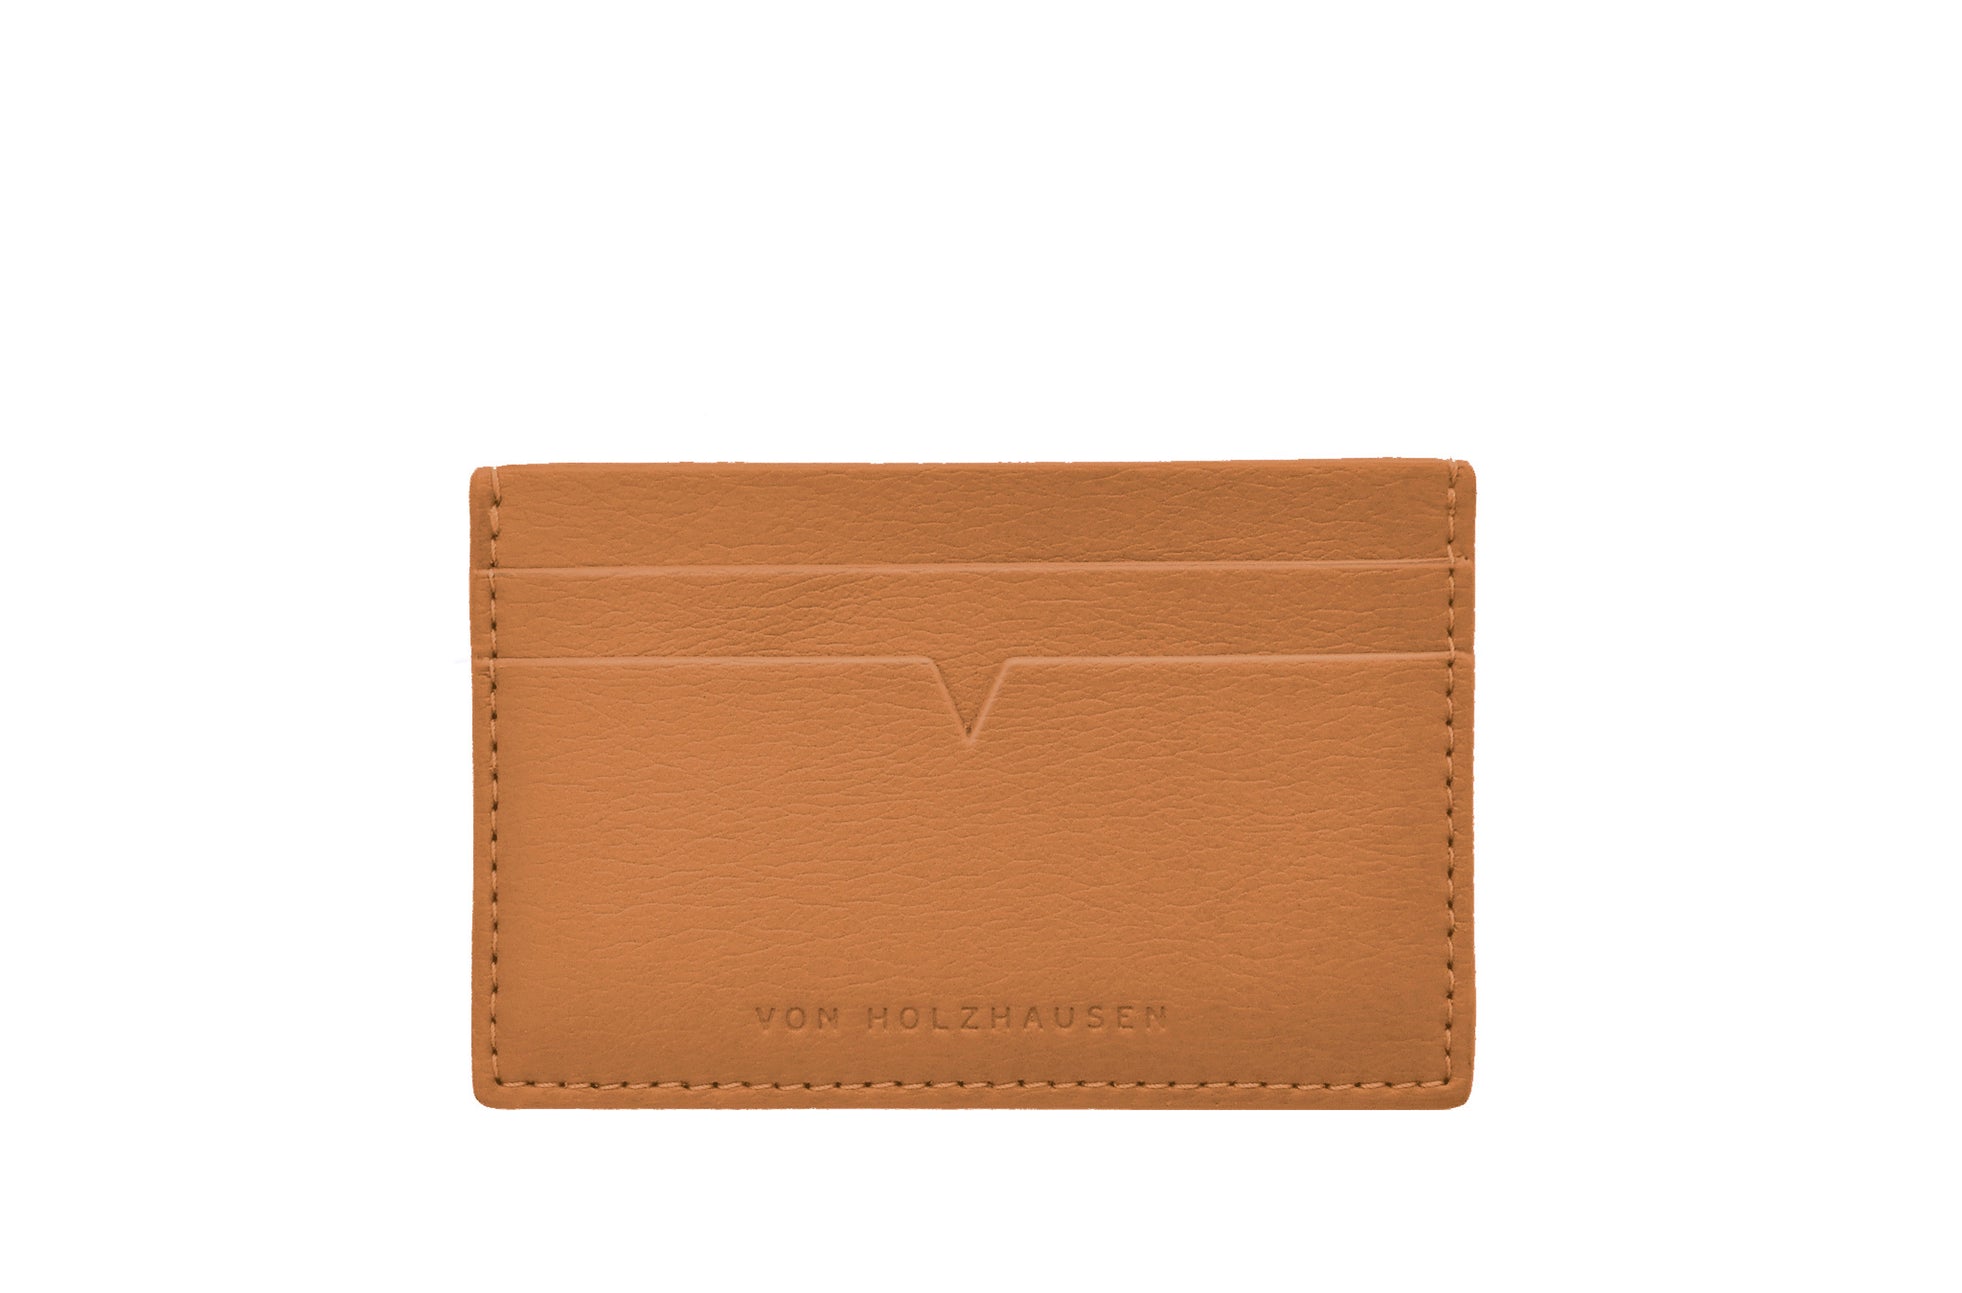 The Credit Card Holder in Technik-Leather in Caramel image 1